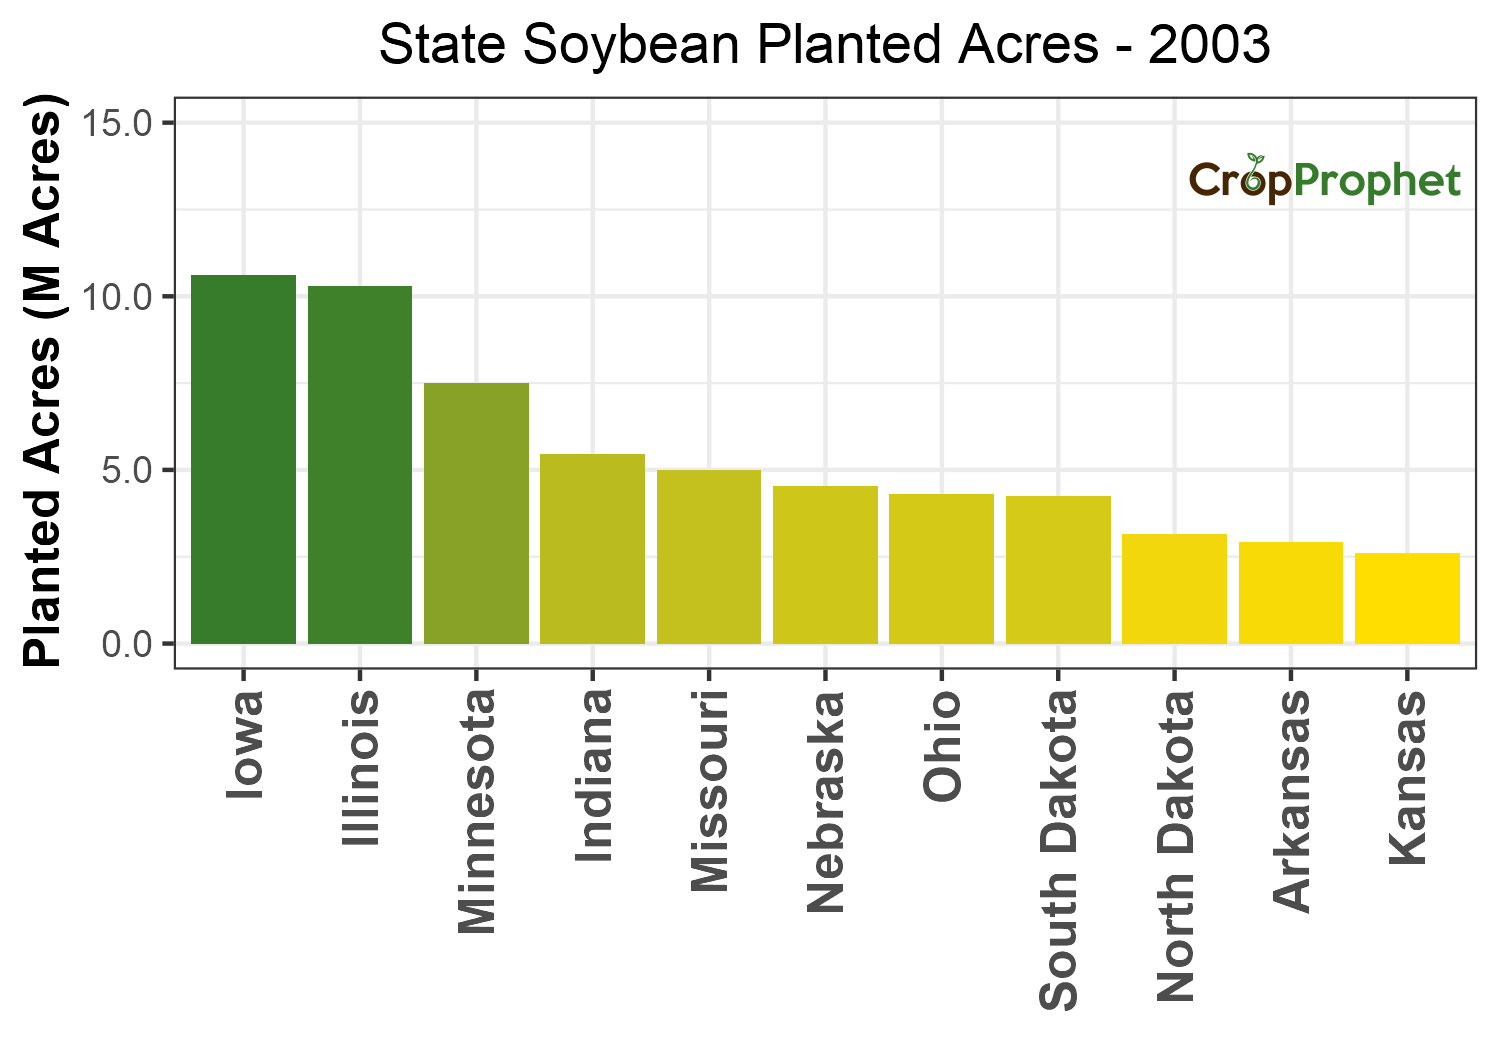 Soybean Production by State - 2003 Rankings